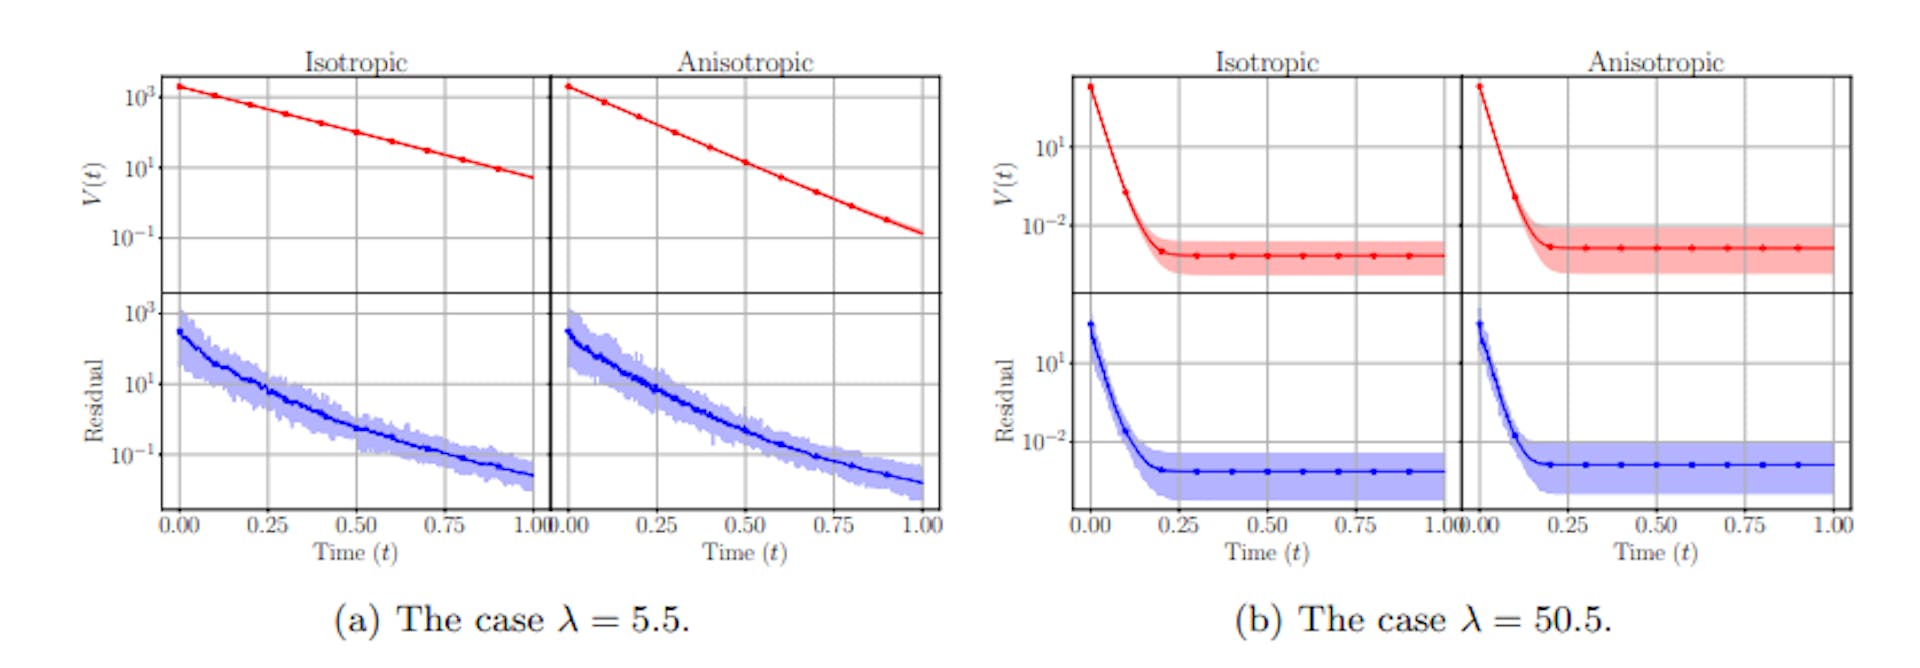 Figure 3: Comparing Variance and Residual (according to (3.7)) as a function of time for isotropic and anisotropic dynamics in Algorithm 1 with two different choices of the drift parameter λ. Confer case 1 for details and to Section 3.2.2 for further comments.